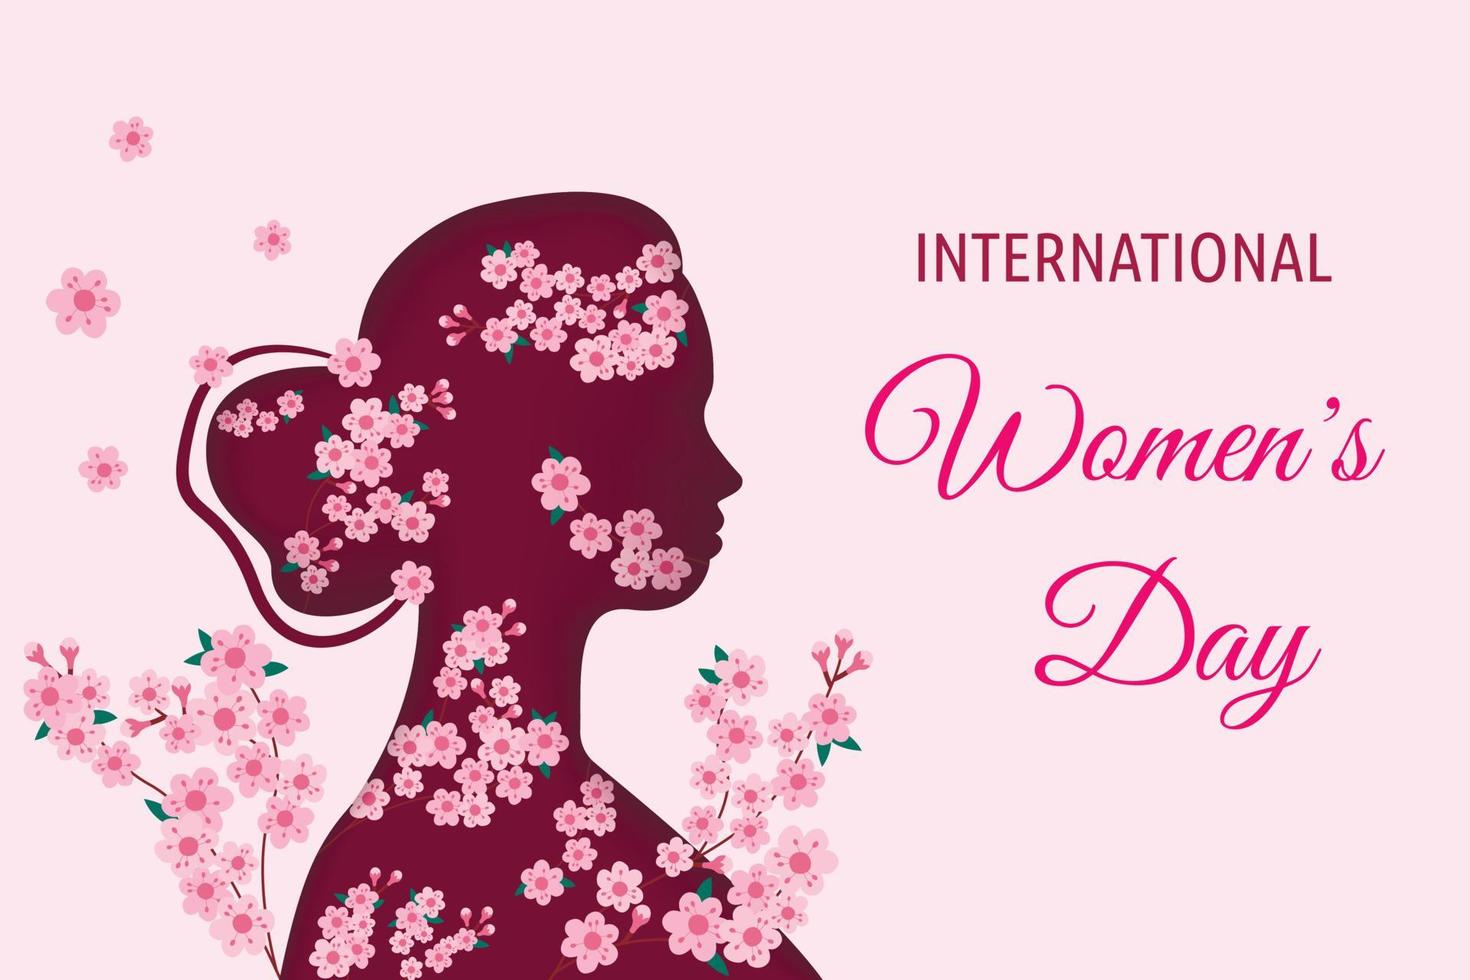 Happy Womens Day greeting card vector illustration. Papercut female silhouette in profile with beautiful pink Sakura flowers and branches. Cute paper craft design for International Women Day holiday